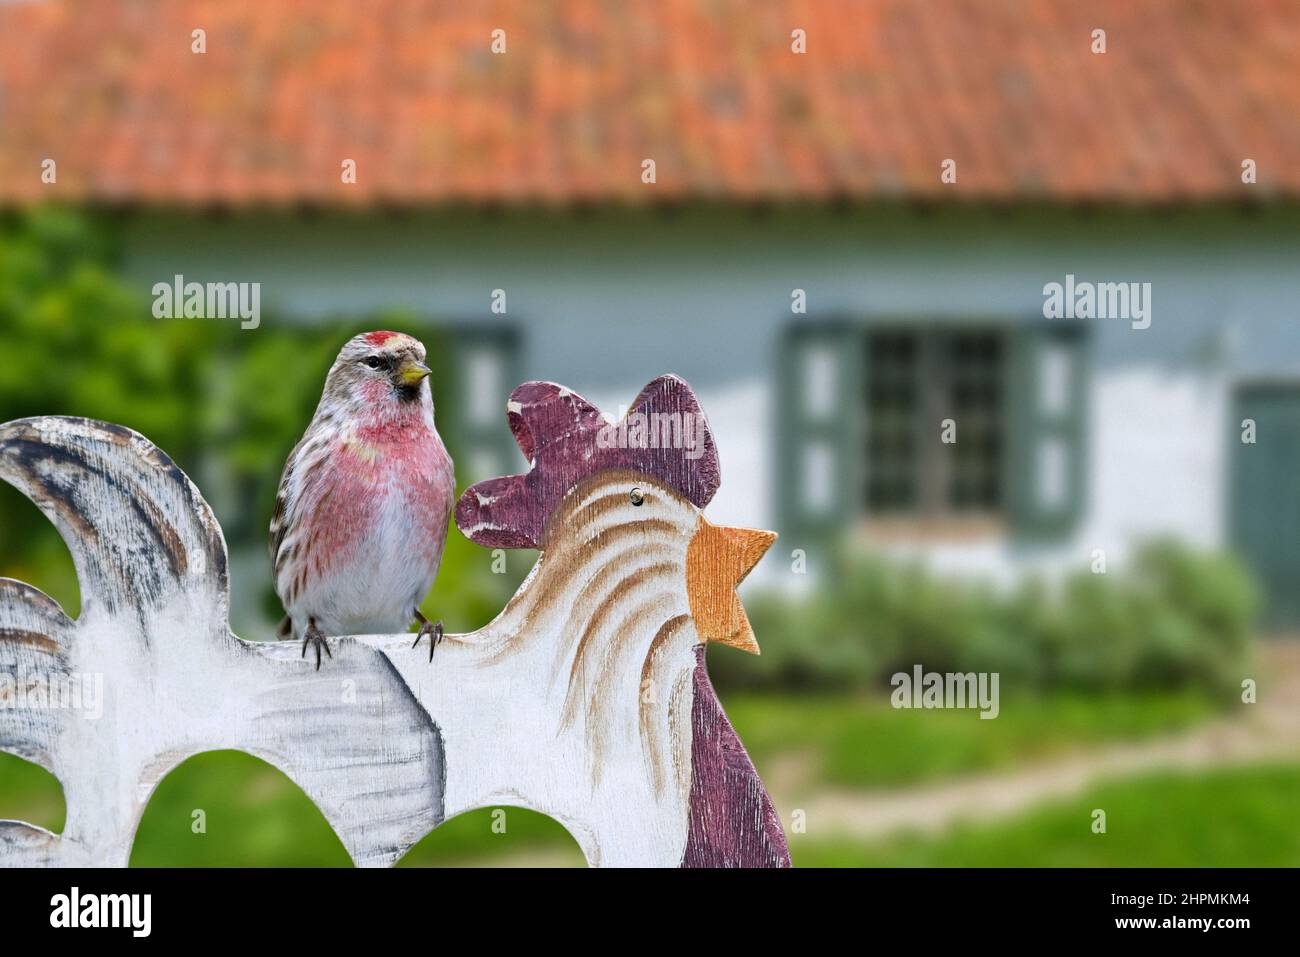 Common redpoll / mealy redpoll (Acanthis flammea / Fringilla flammea) perched on wooden garden ornament of house in the countryside Stock Photo